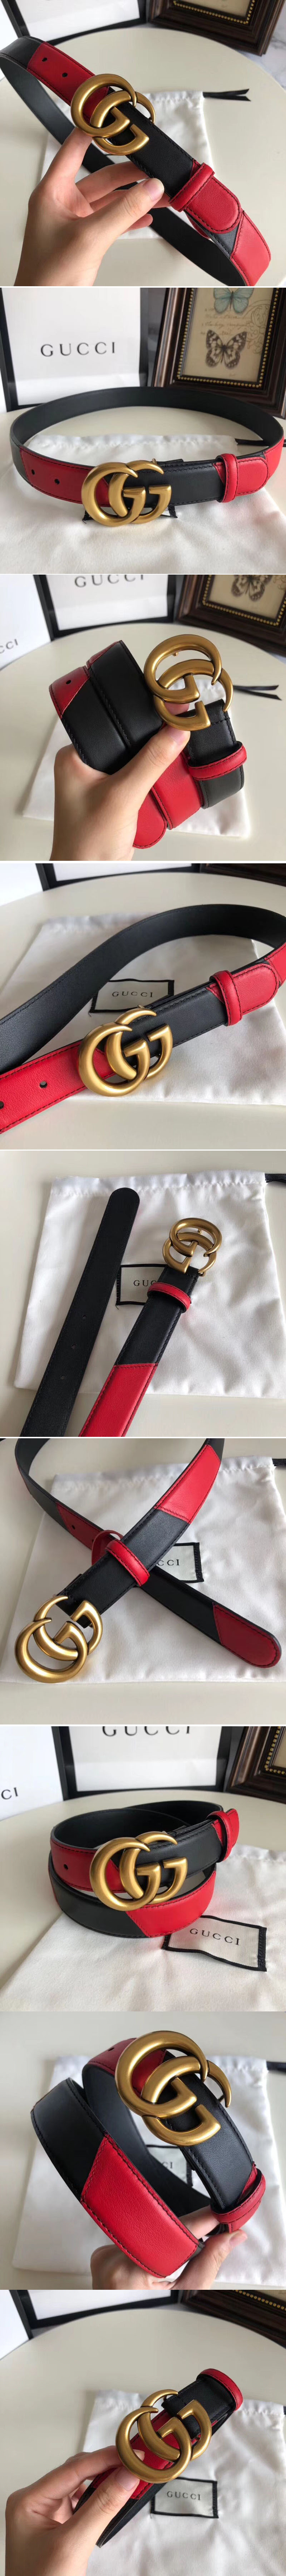 Replica Gucci 582348 30cm Leather belt with Double G buckle Black and Red Leather